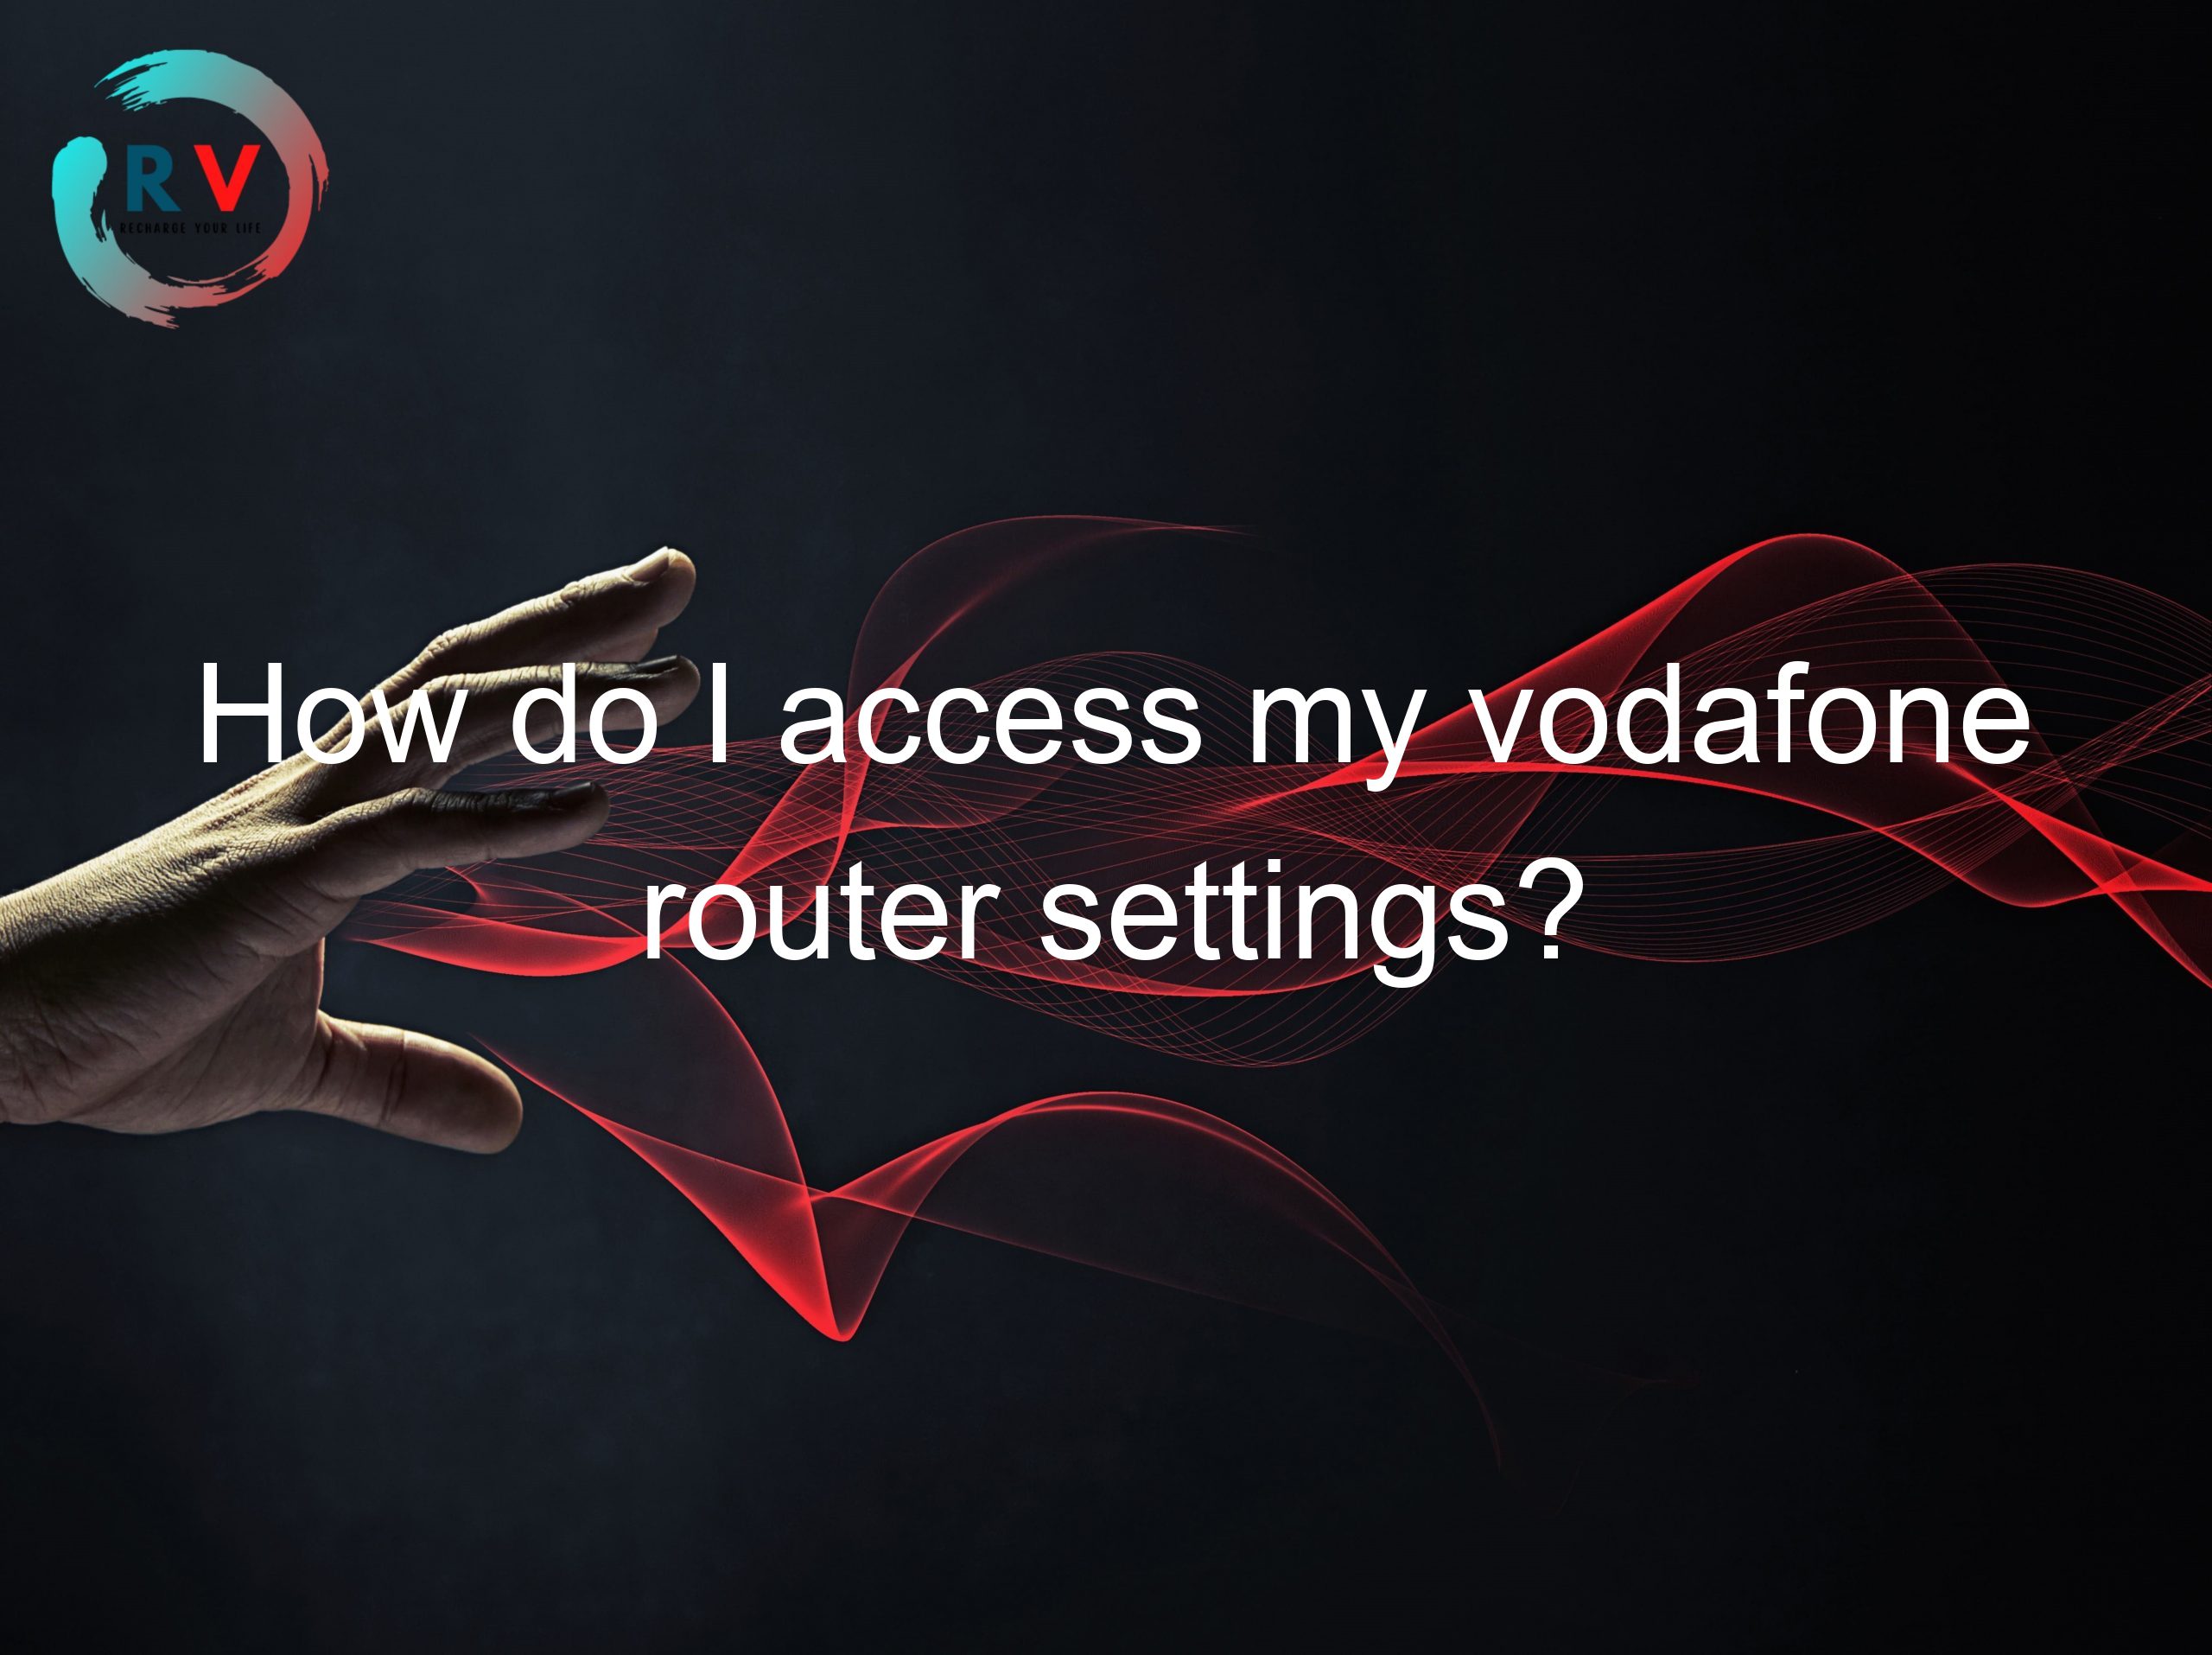 How do I access my vodafone router settings? Click here to find out!